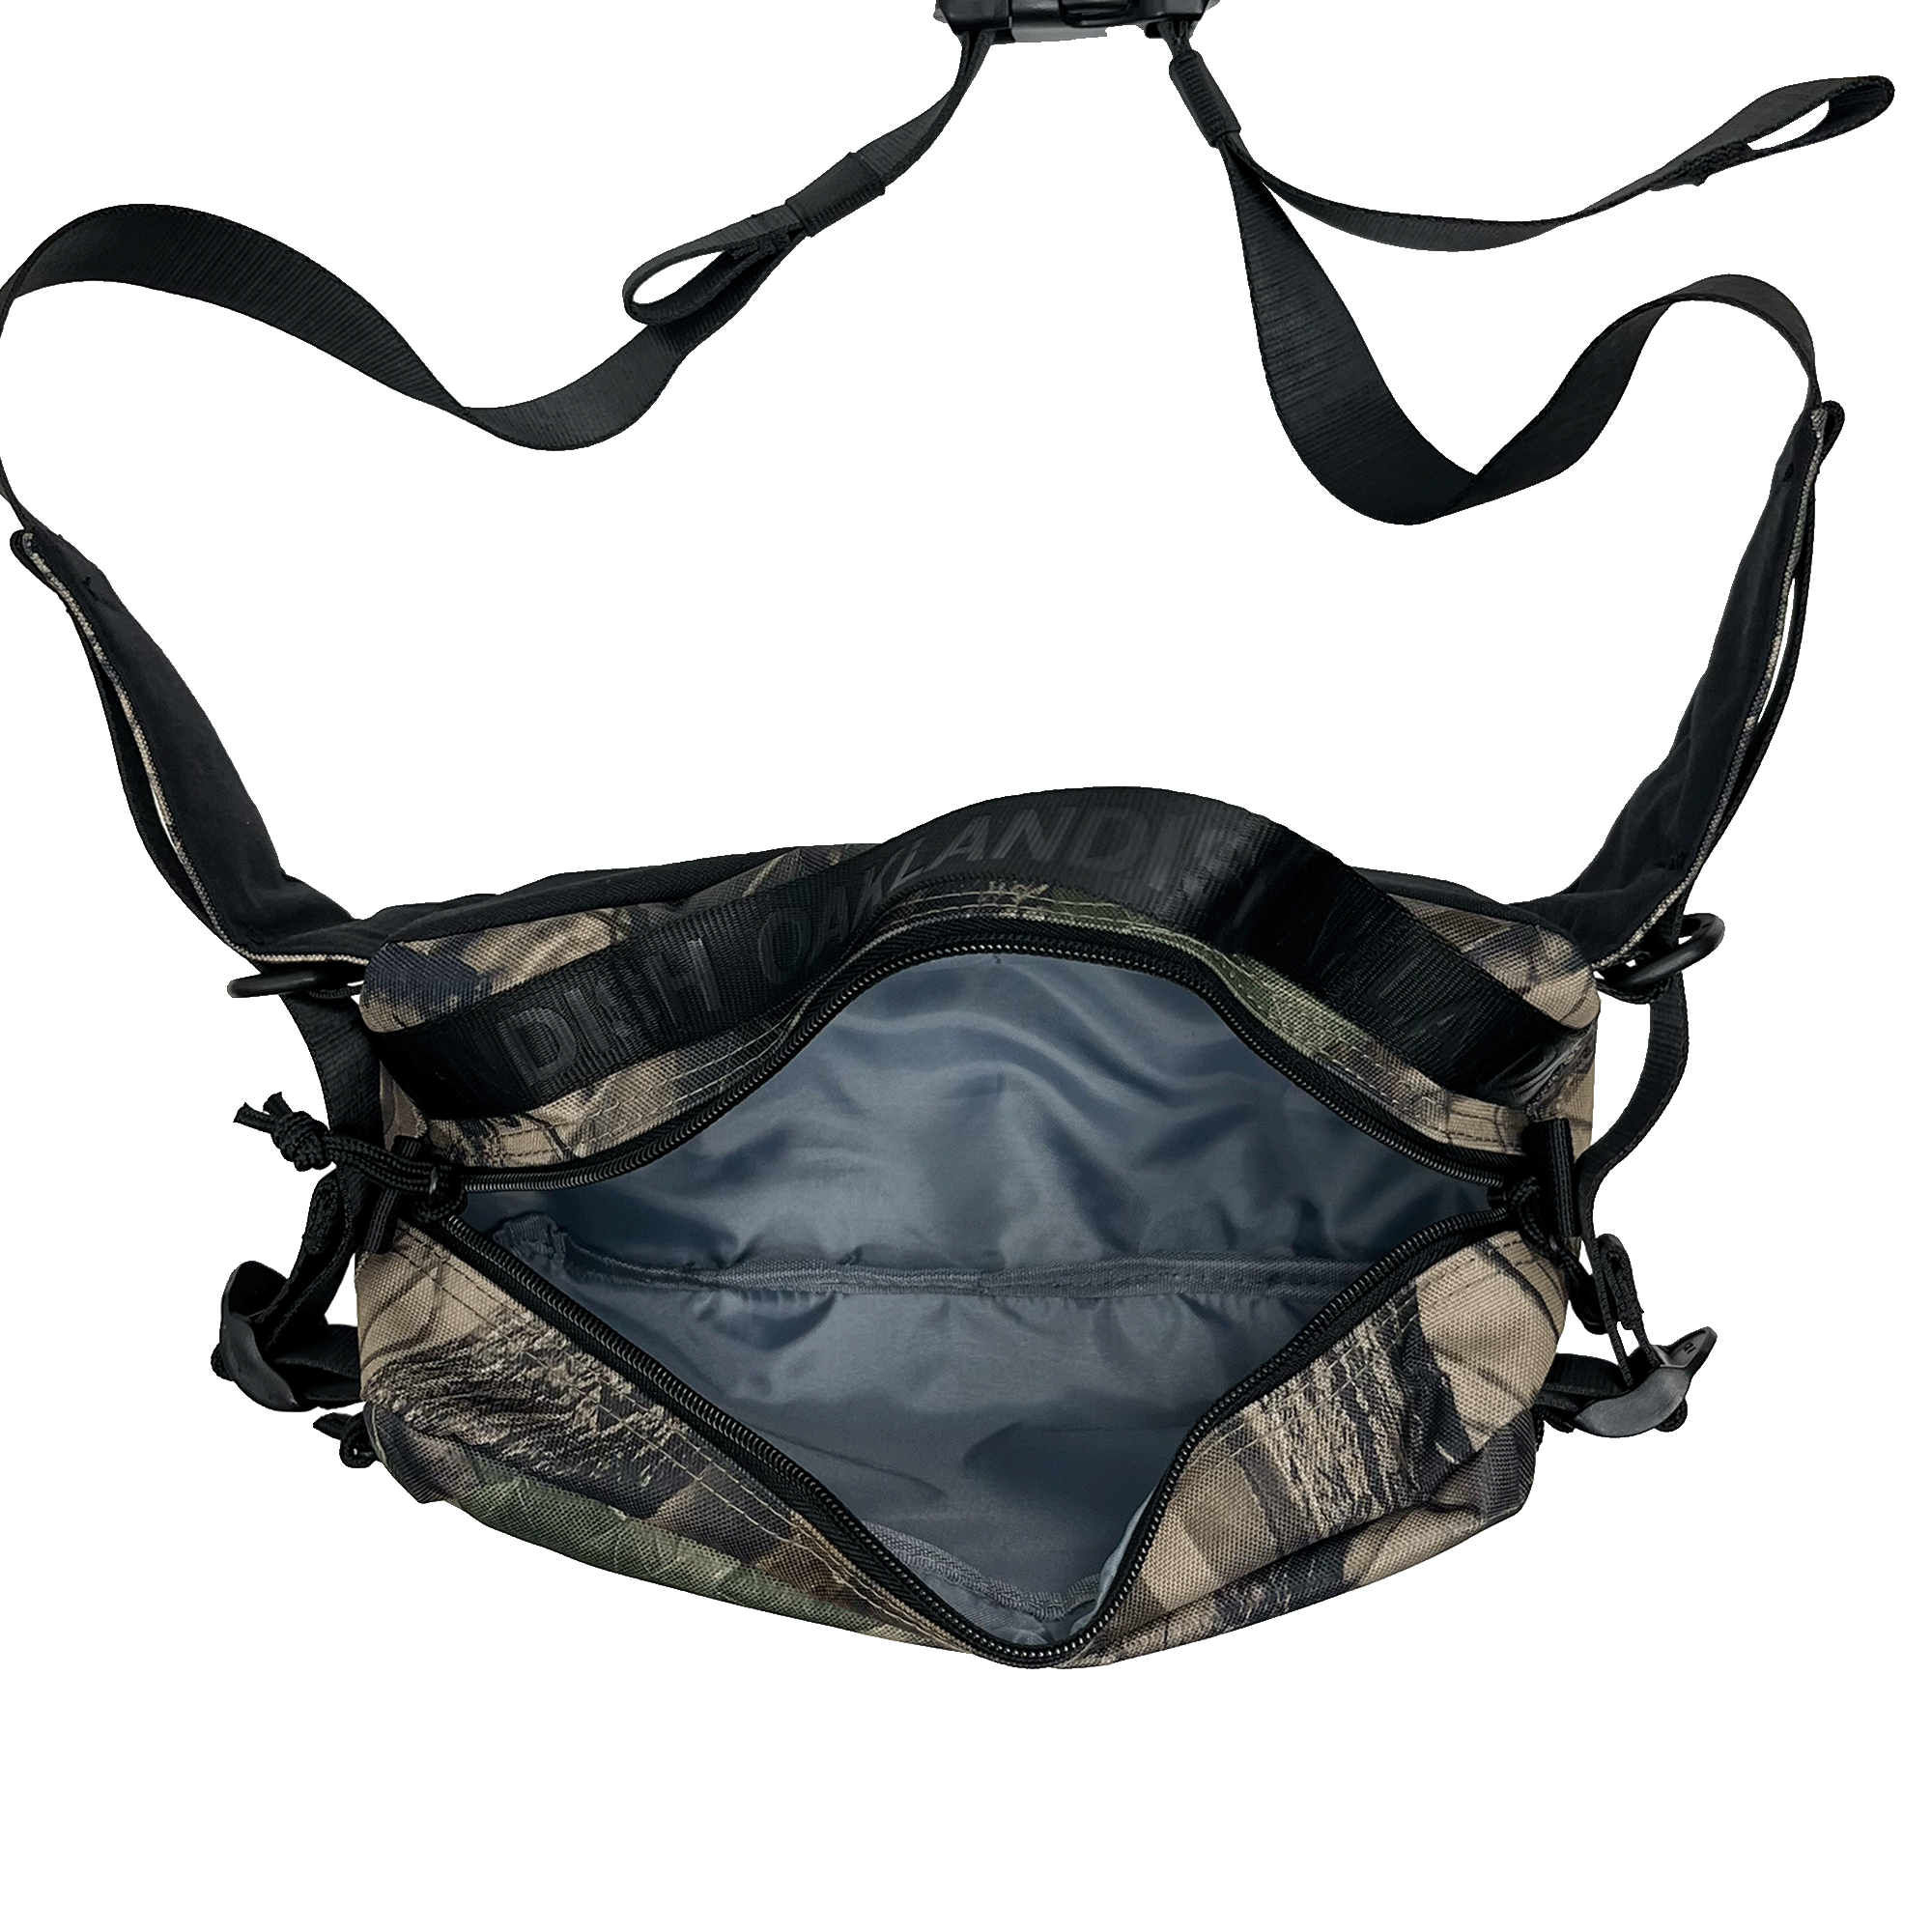 Top view of camo patterned cross-body bag with open zipper to reveal nylon lined insides.